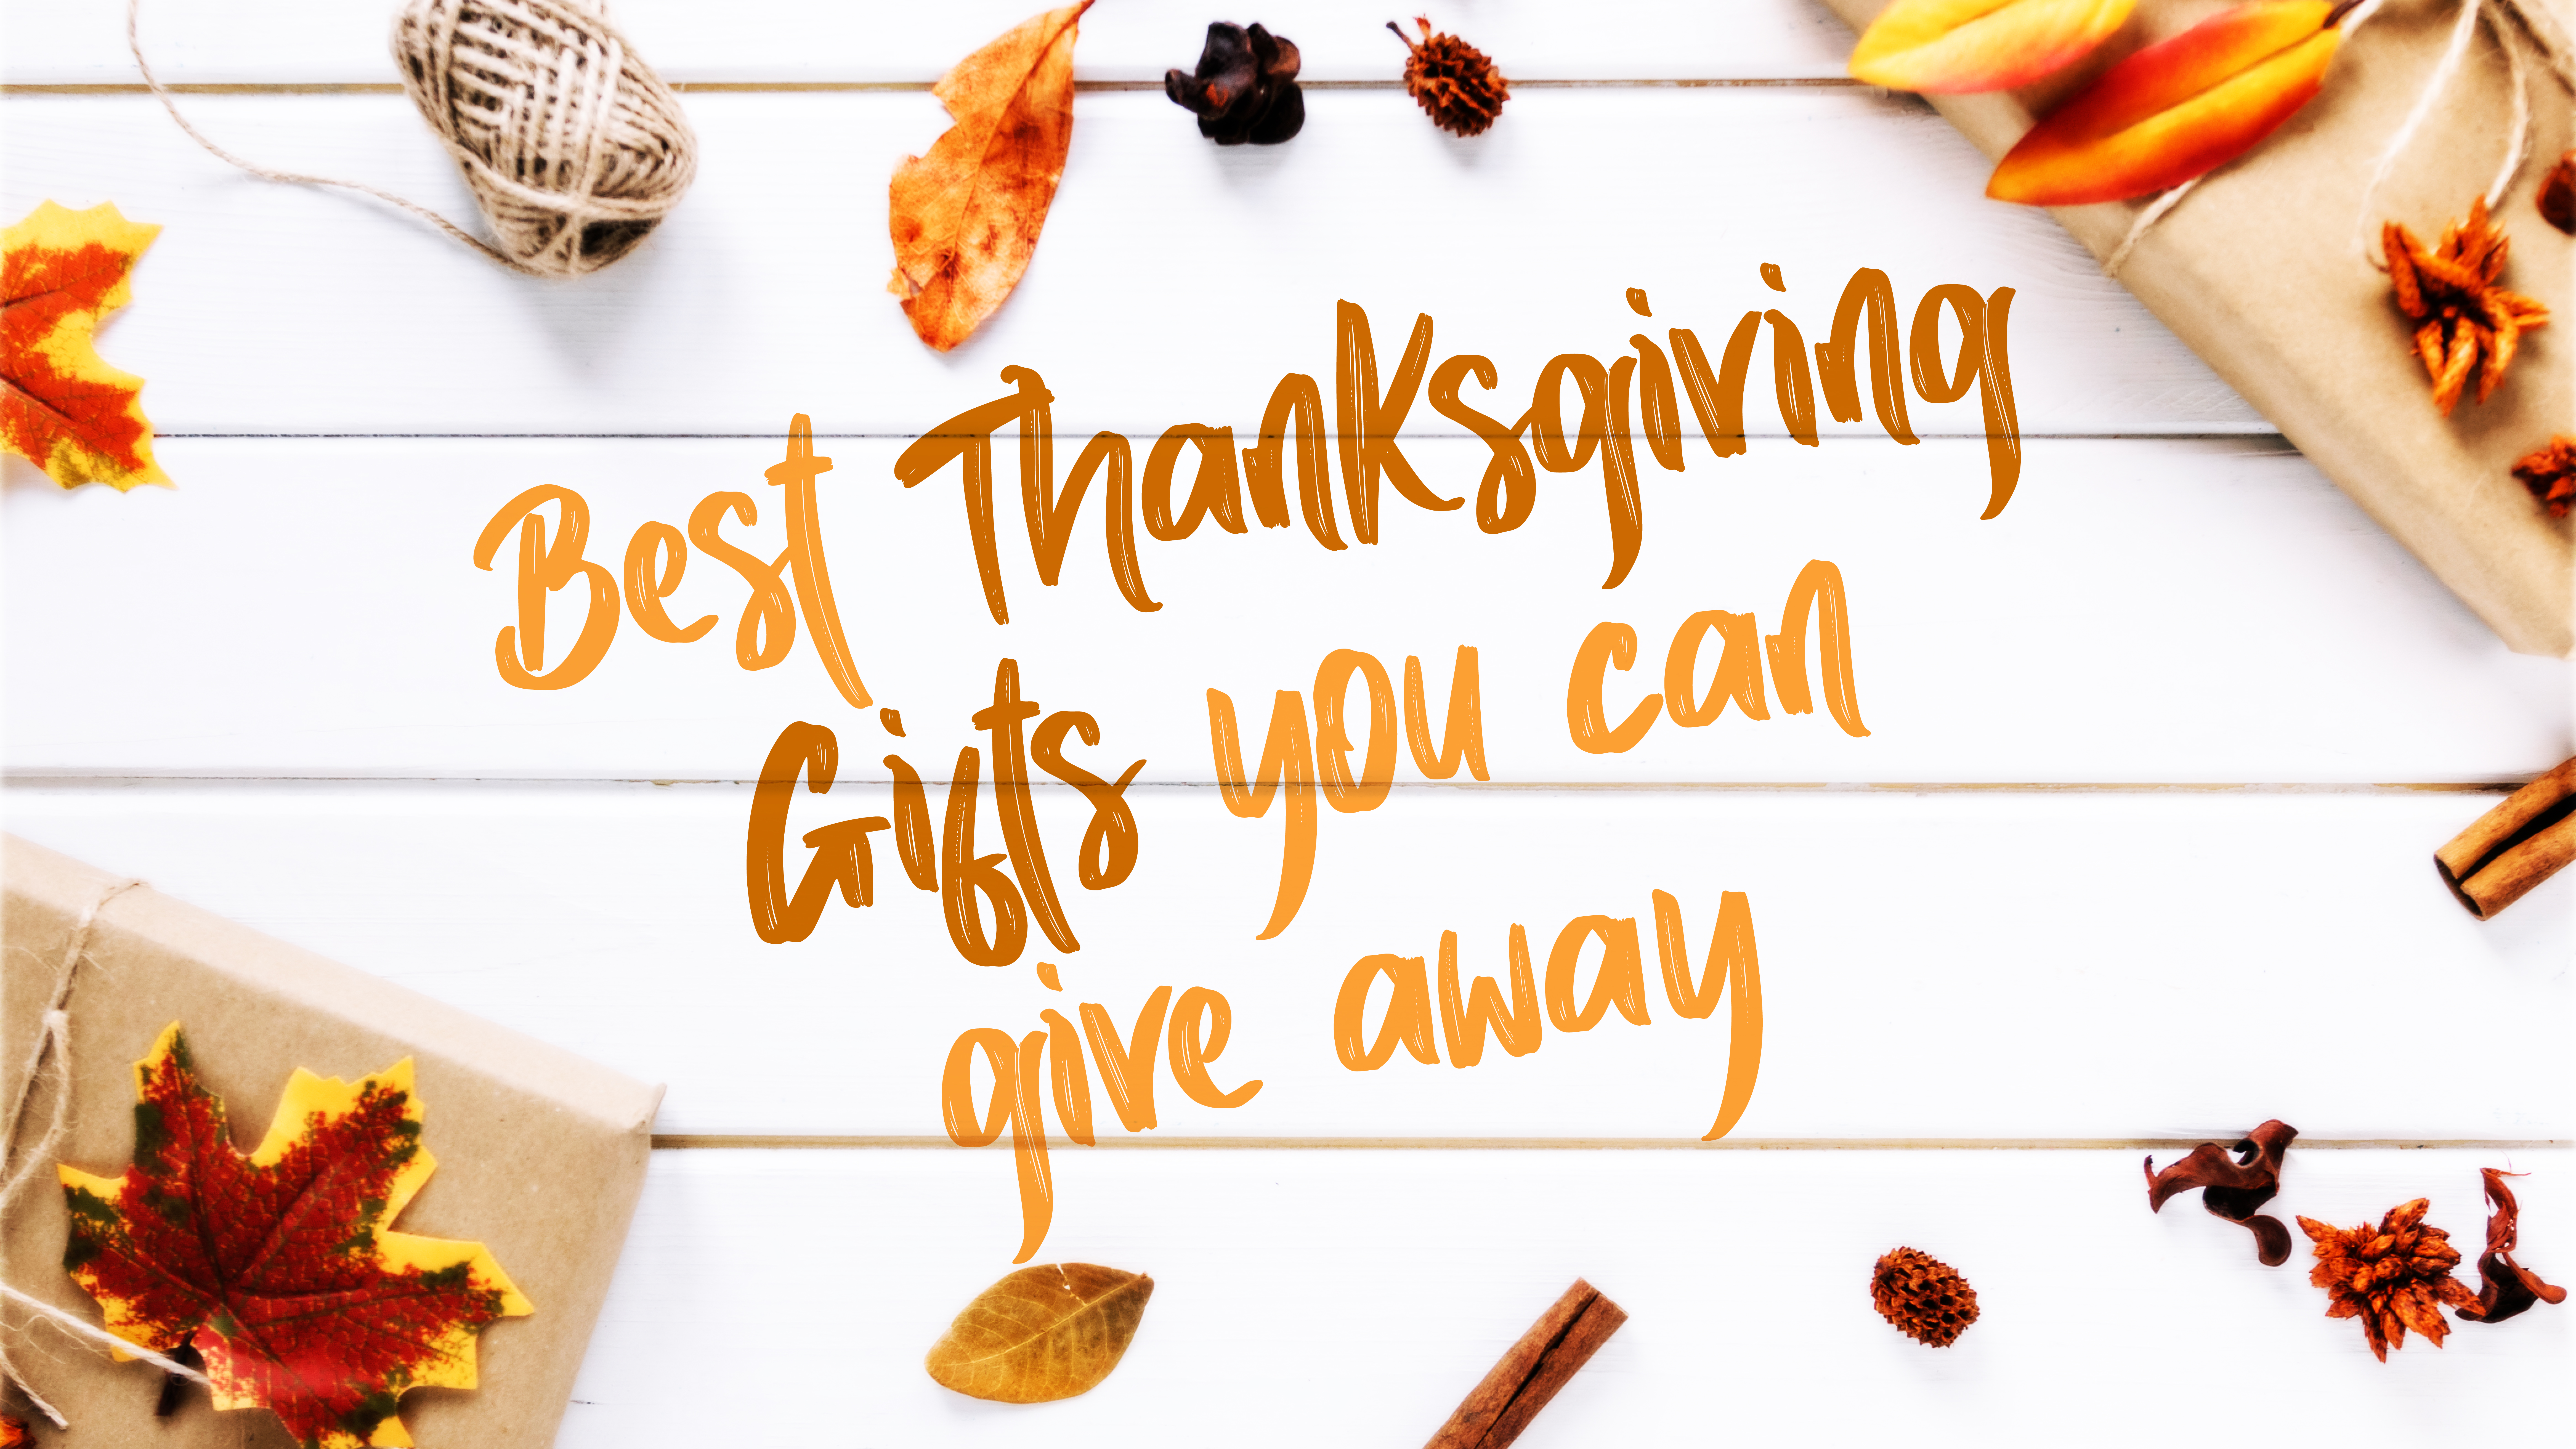 Best Thanksgiving Gifts you can give away